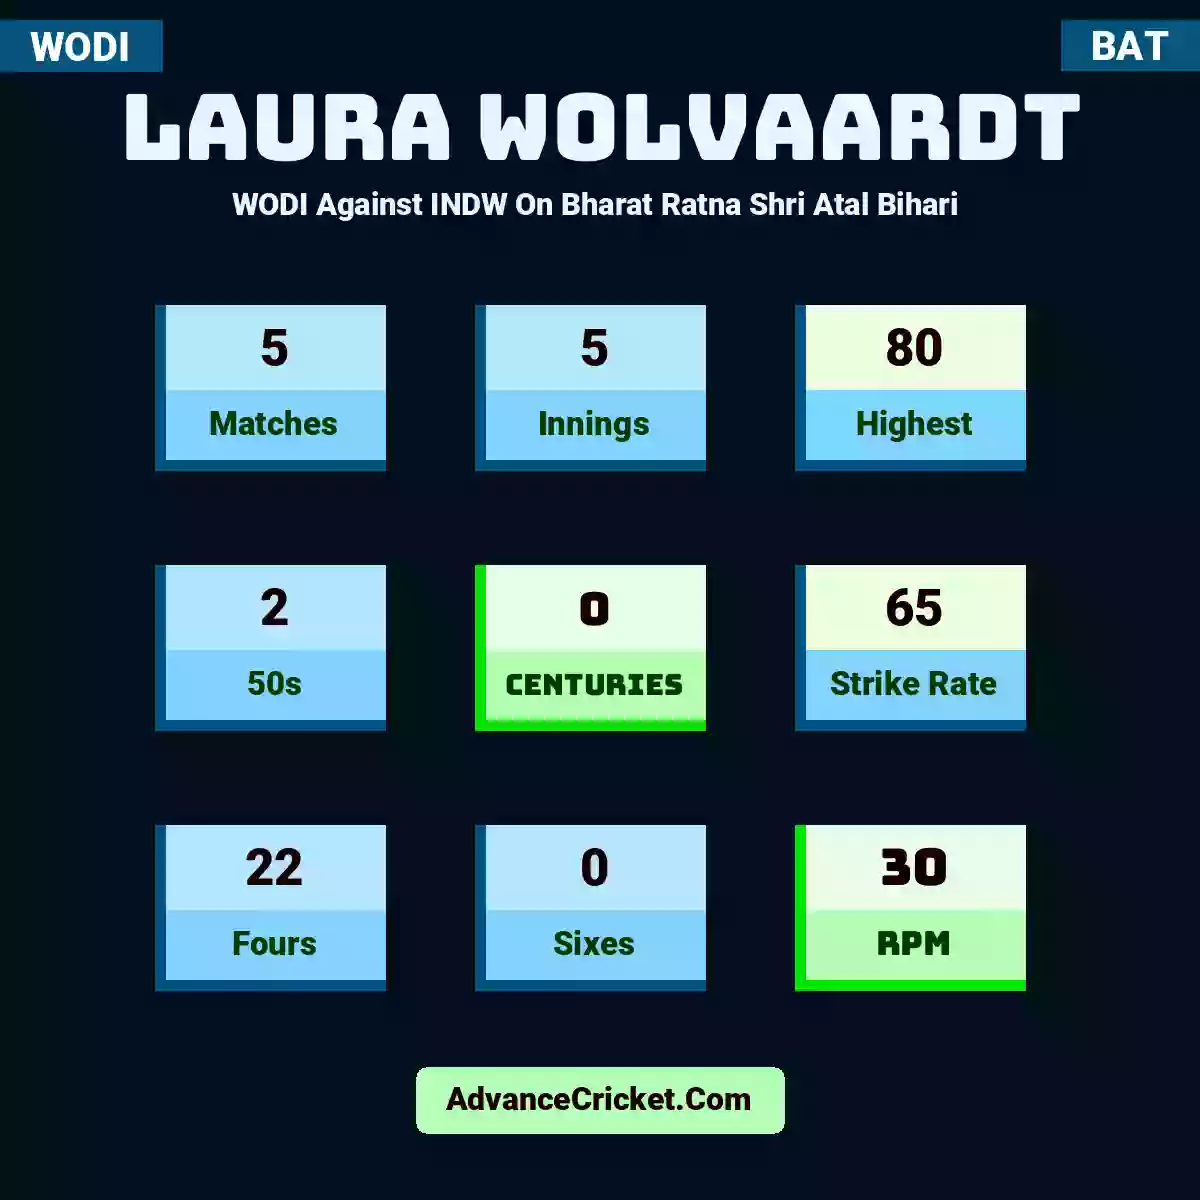 Laura Wolvaardt WODI  Against INDW On Bharat Ratna Shri Atal Bihari , Laura Wolvaardt played 5 matches, scored 80 runs as highest, 2 half-centuries, and 0 centuries, with a strike rate of 65. L.Wolvaardt hit 22 fours and 0 sixes, with an RPM of 30.